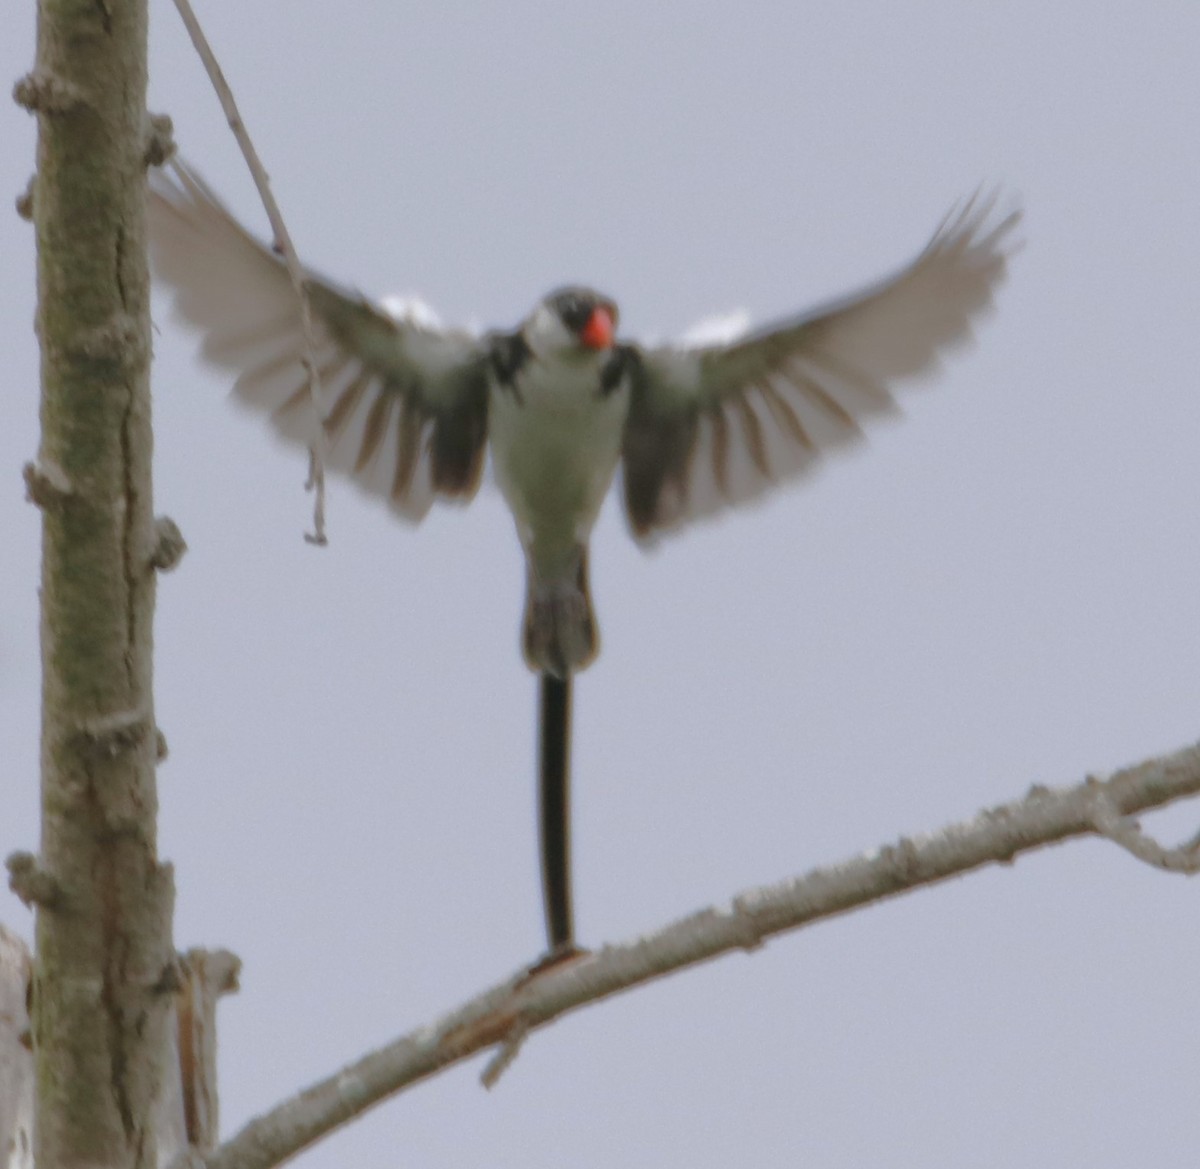 Pin-tailed Whydah - Barry Spolter